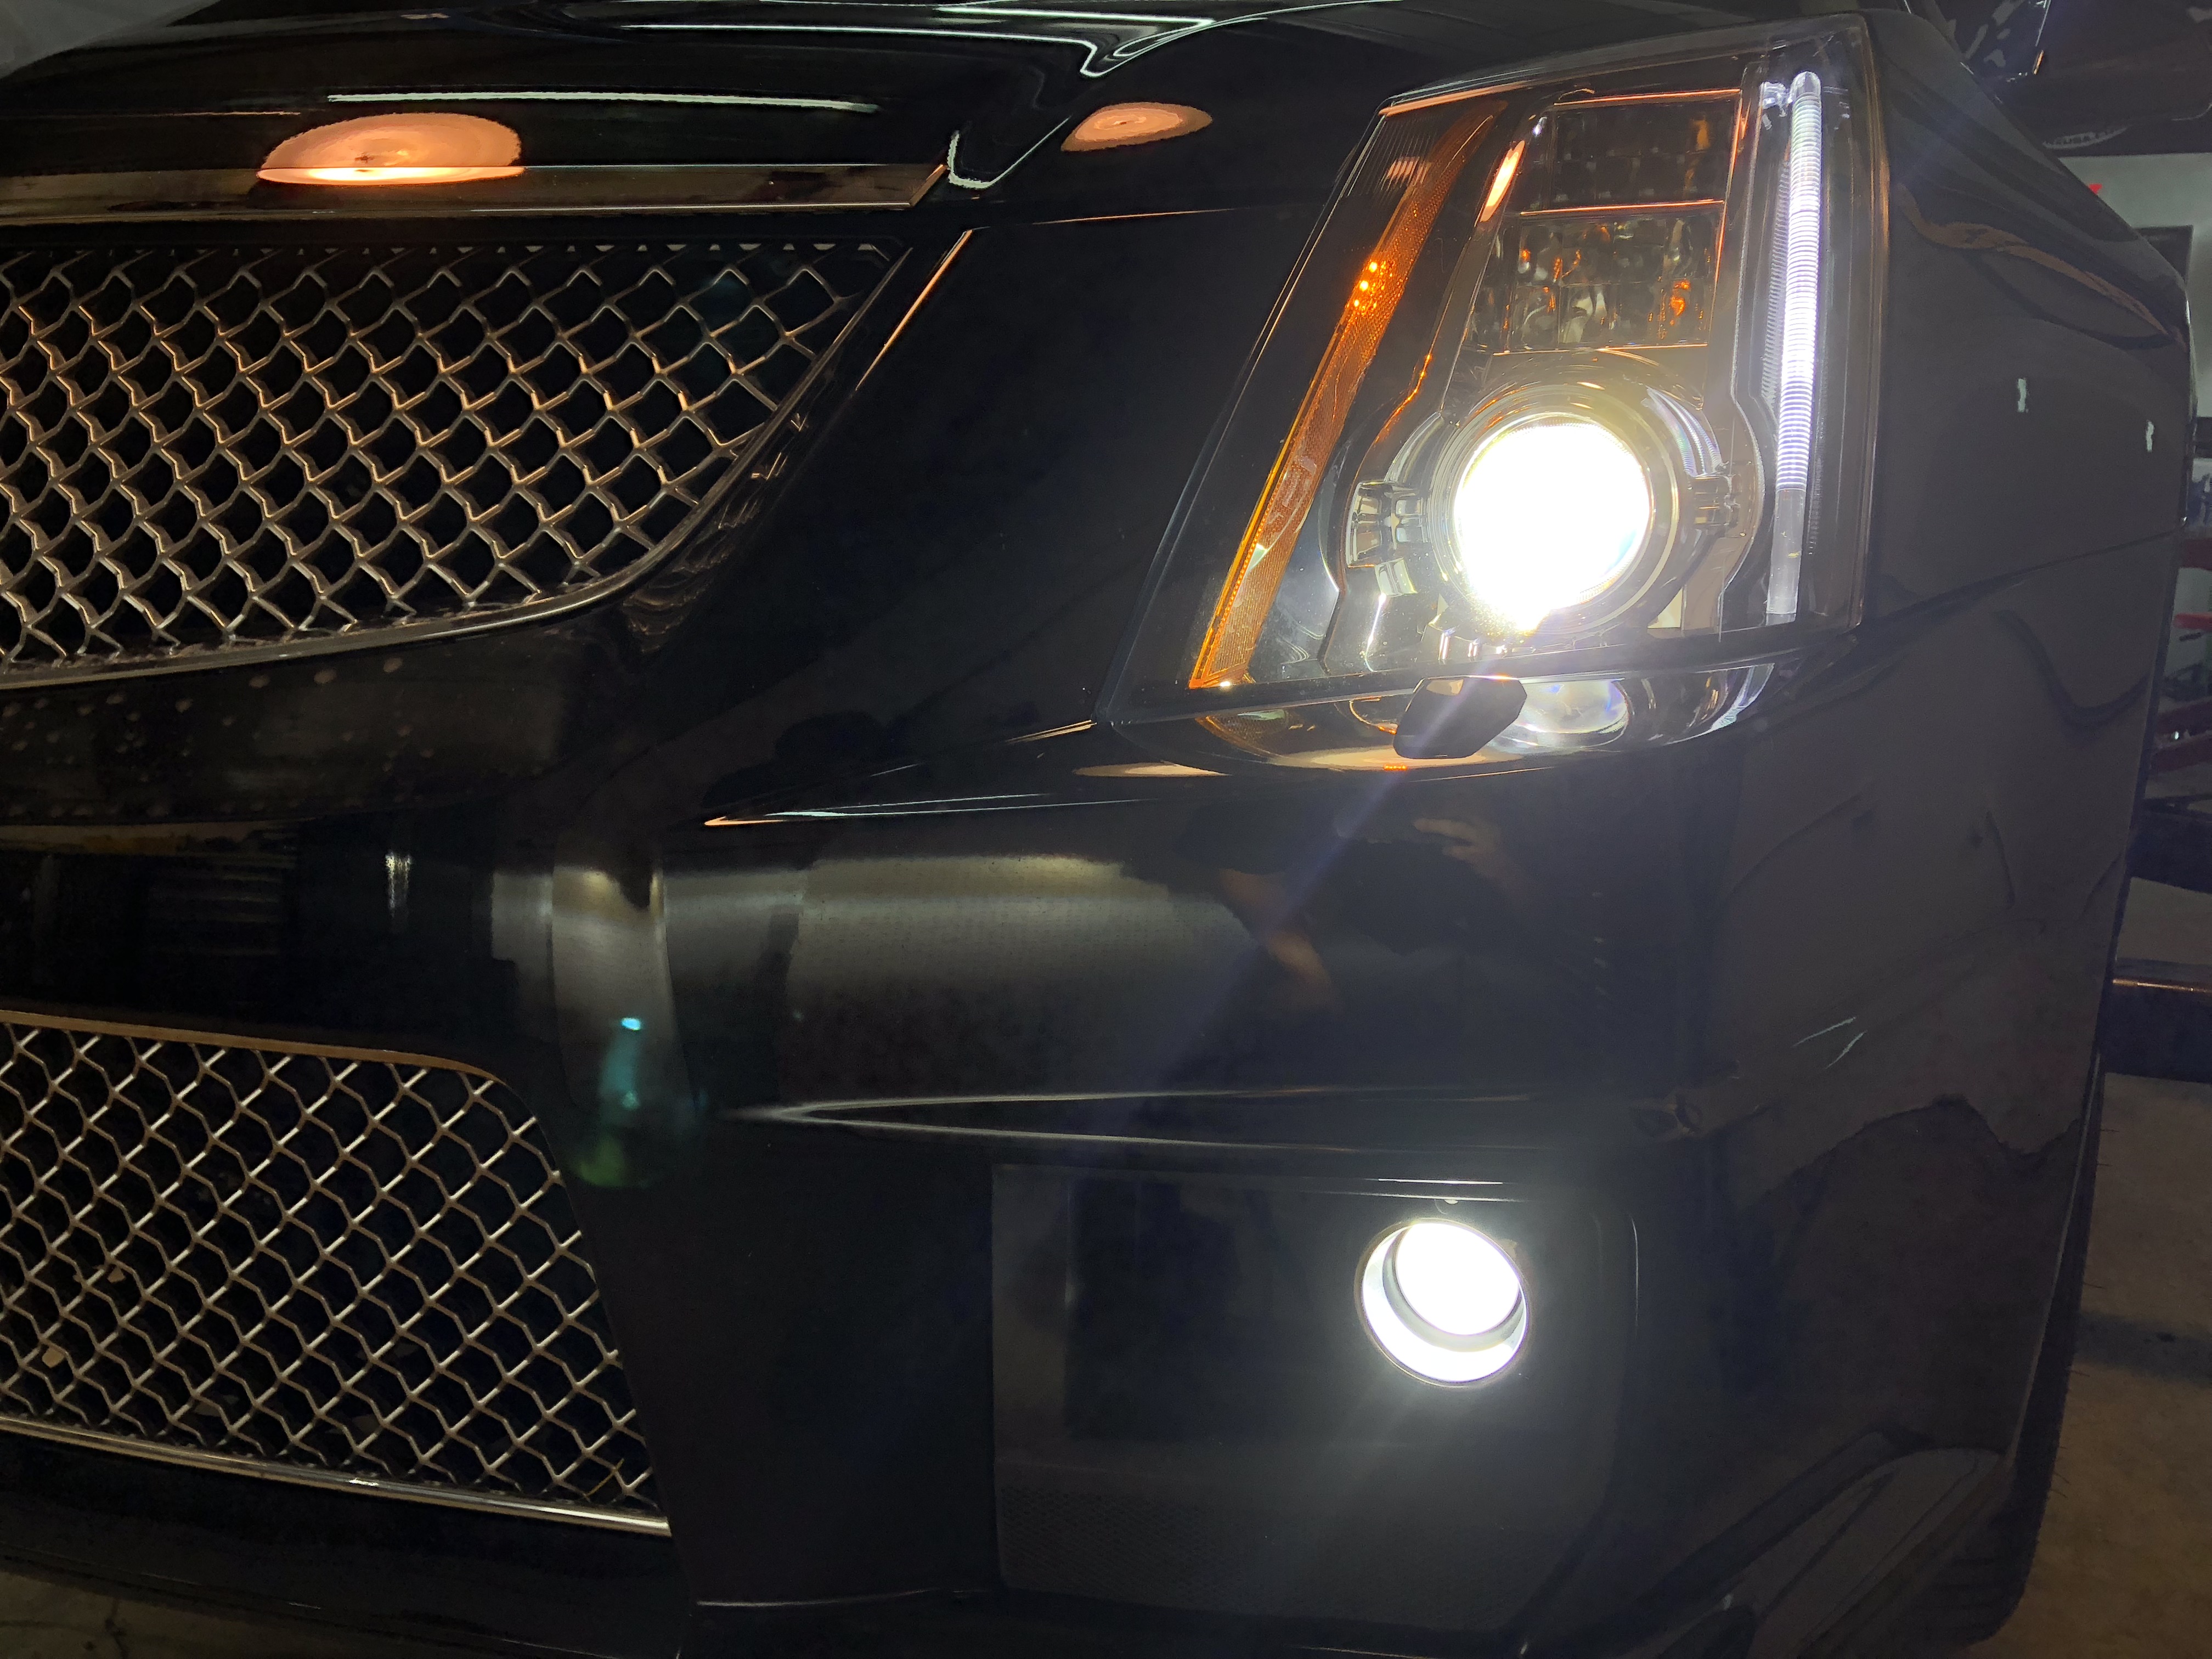 LED H11 420W 160000LM 6K Fog Light Bright Power For 2008-2015 Cadillac CTS @